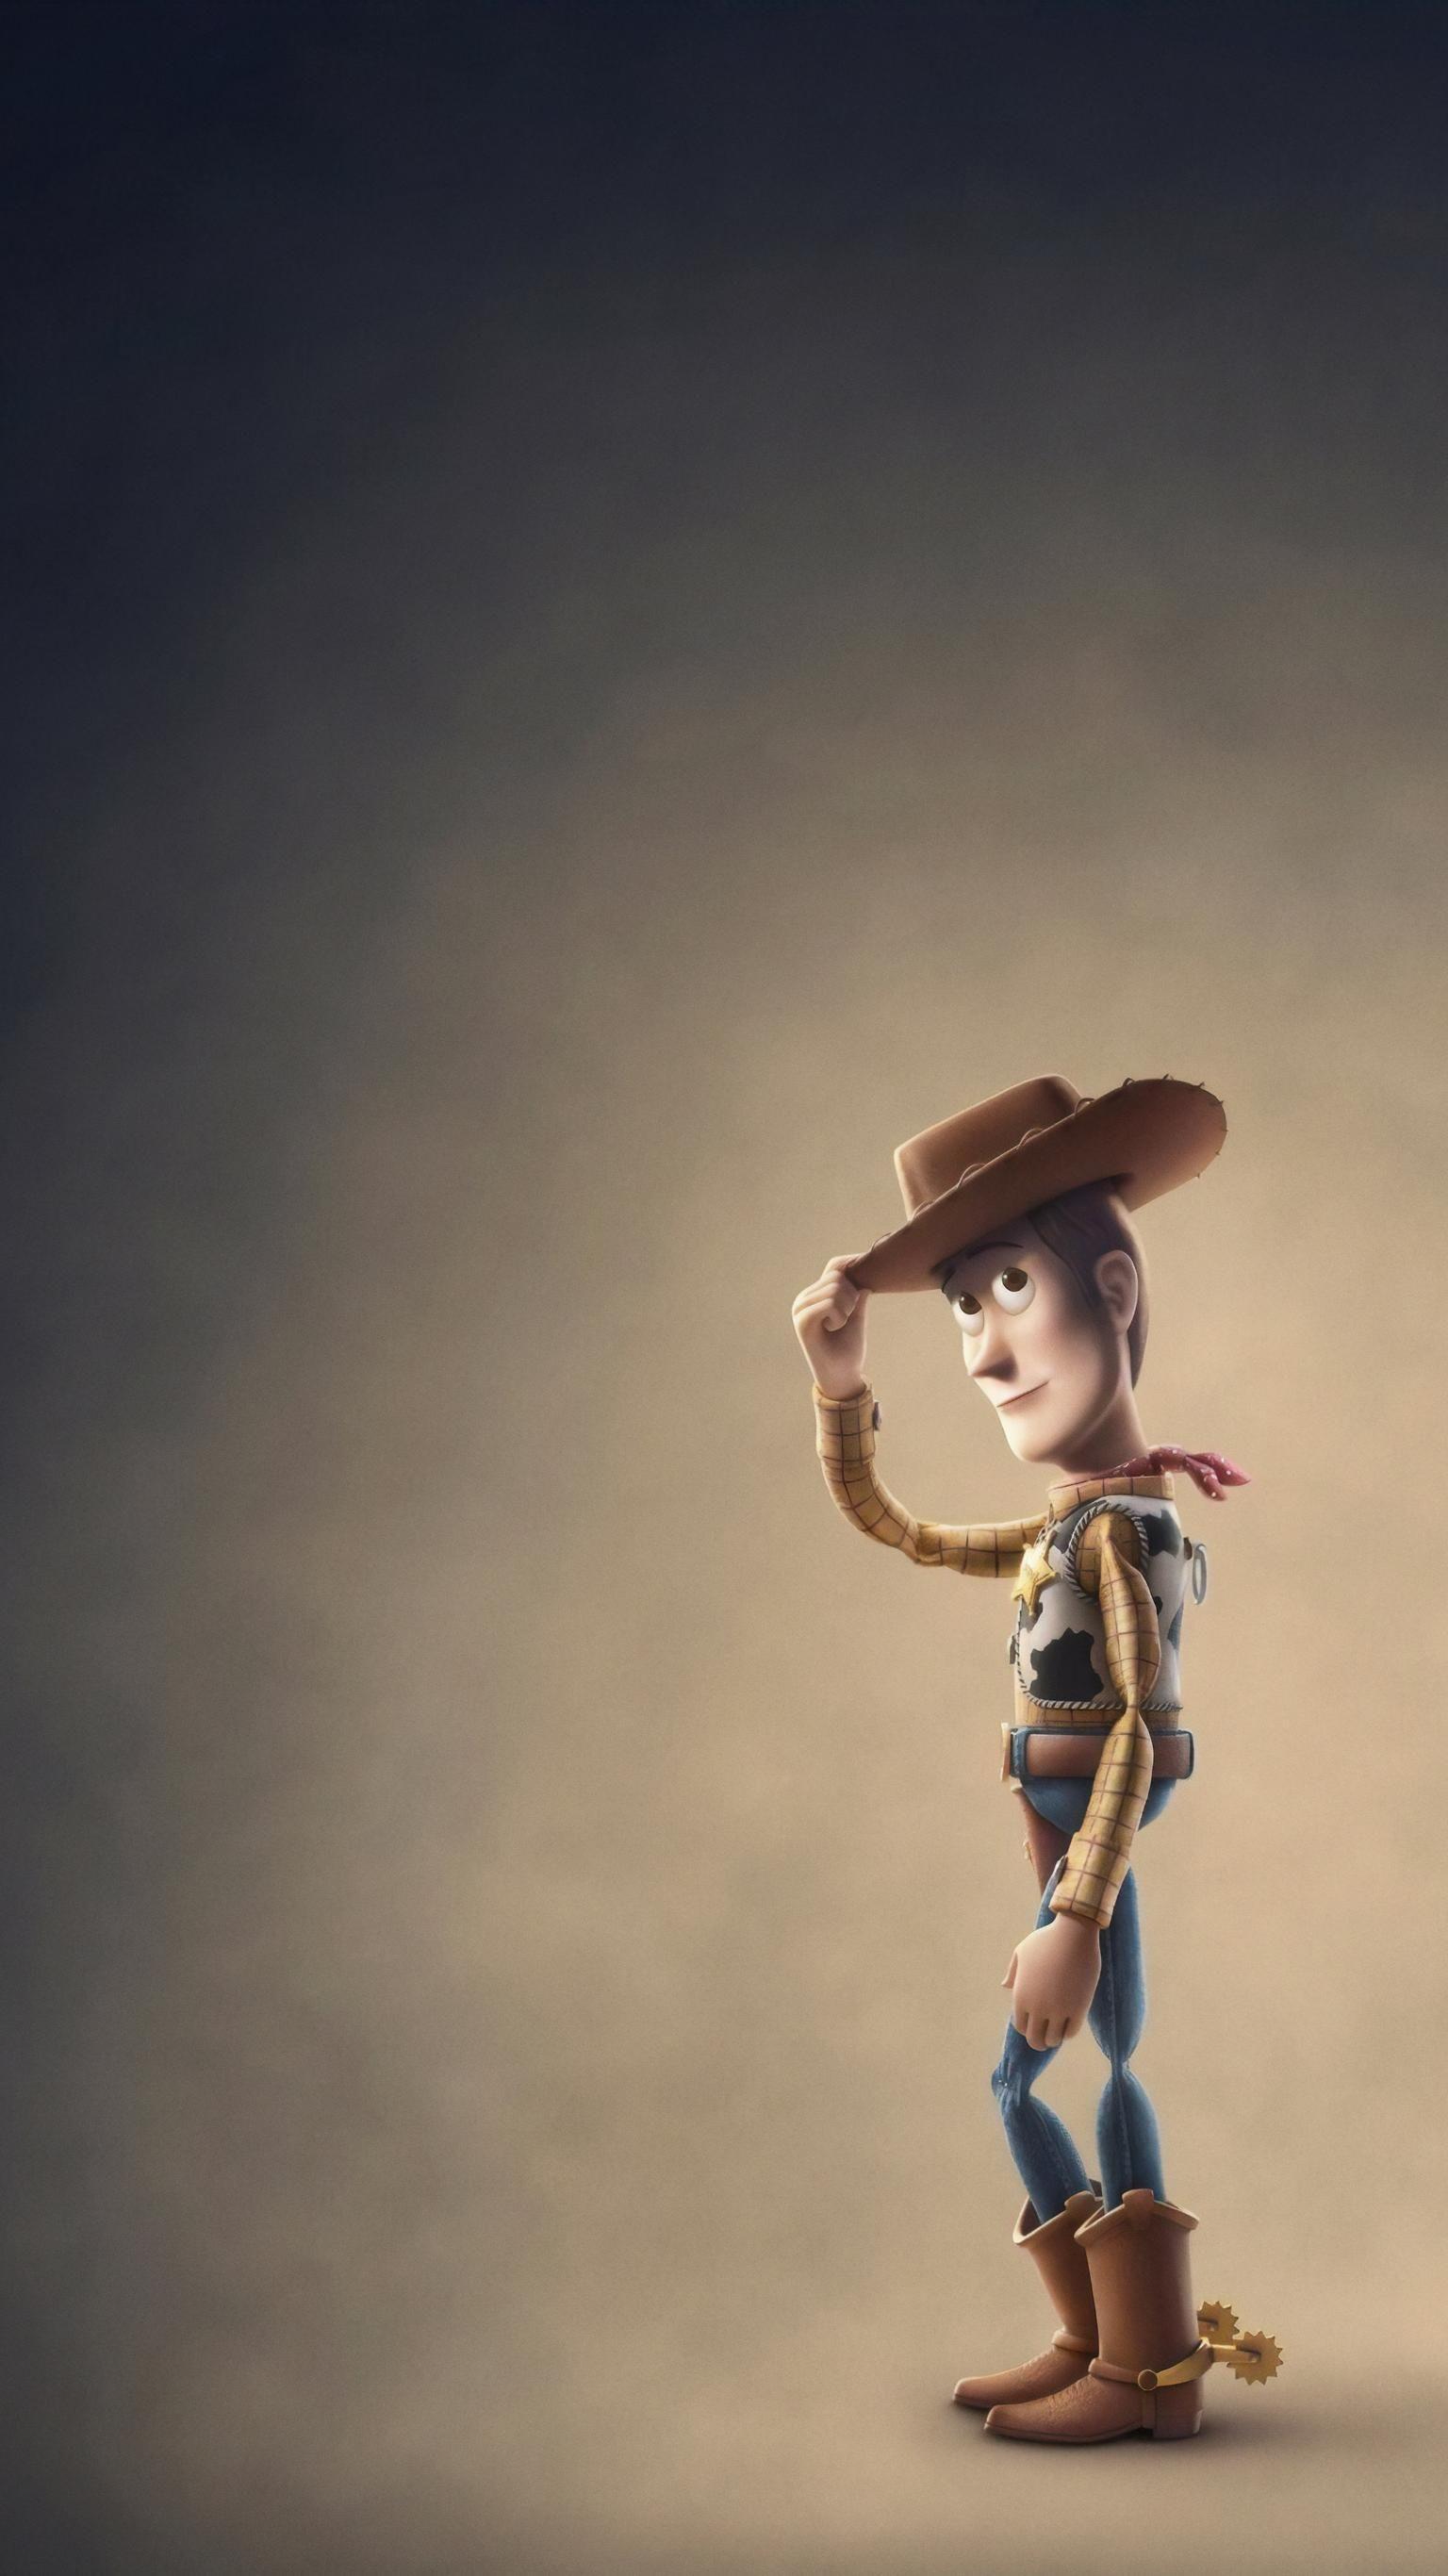 Toy Story 4 (2019) Phone Wallpaper. Toy story, Disney movies